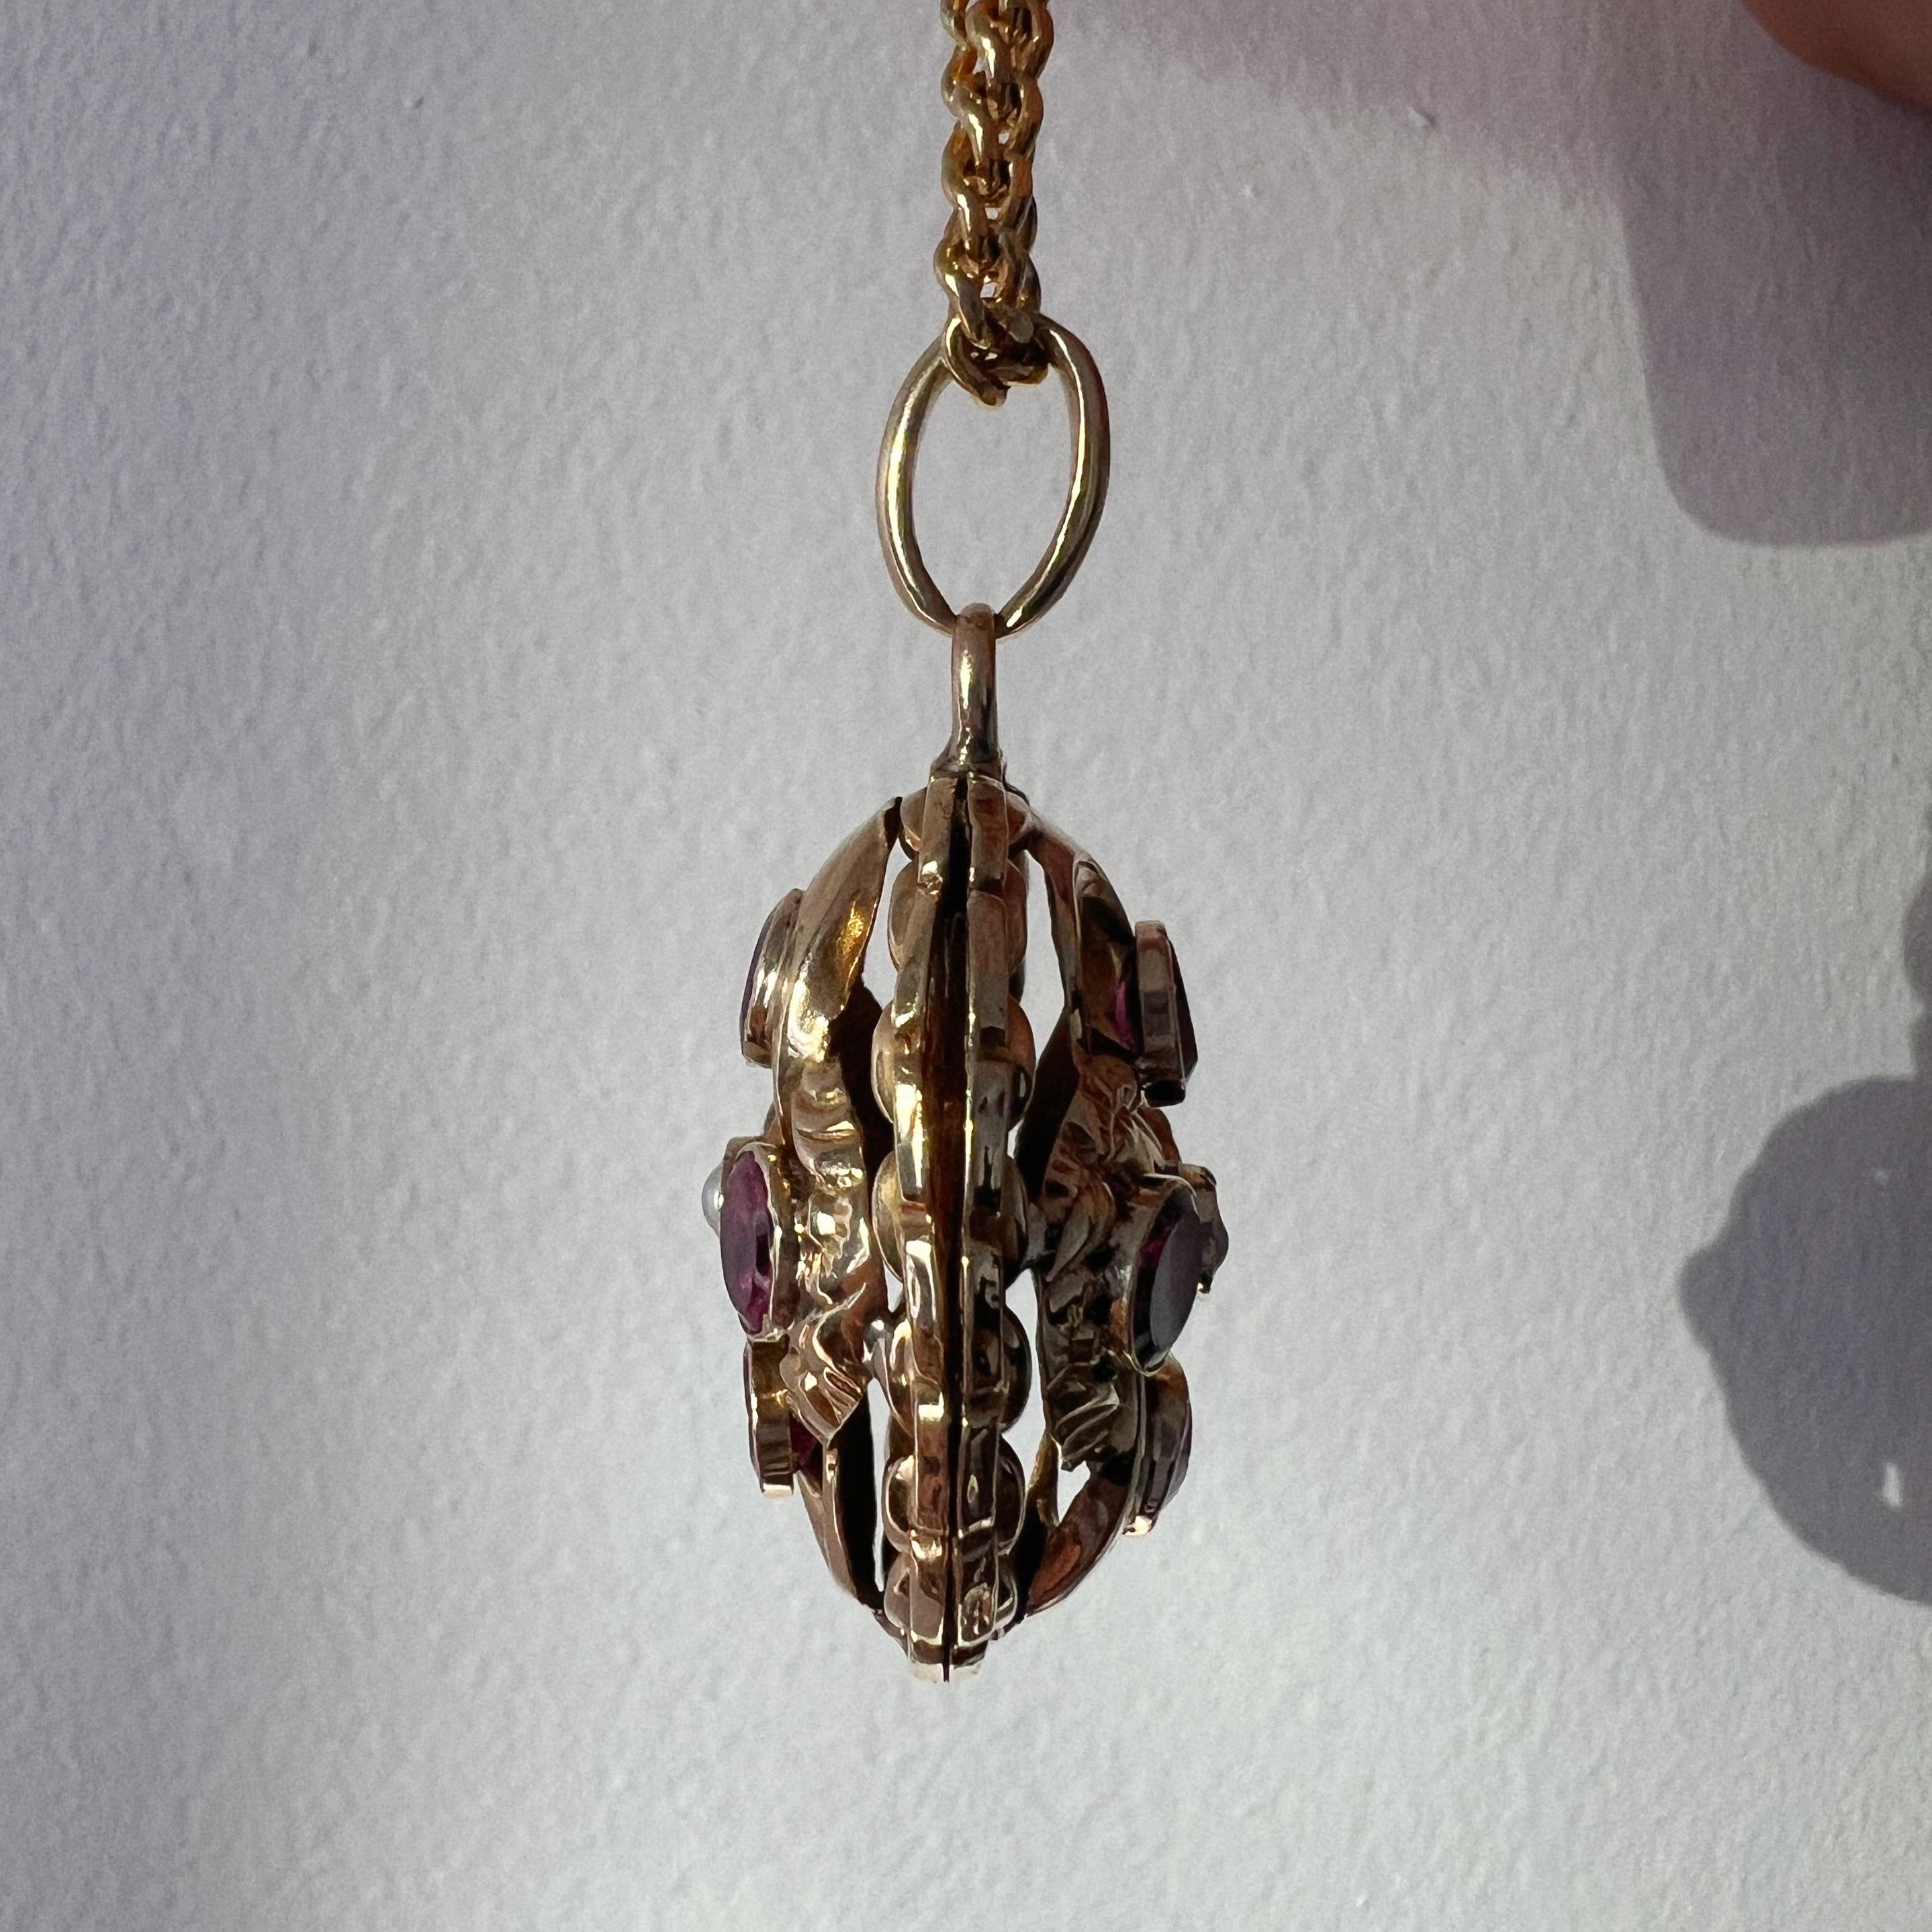 Antique French Victorian era 18K double sided garnet pendant For Sale 3